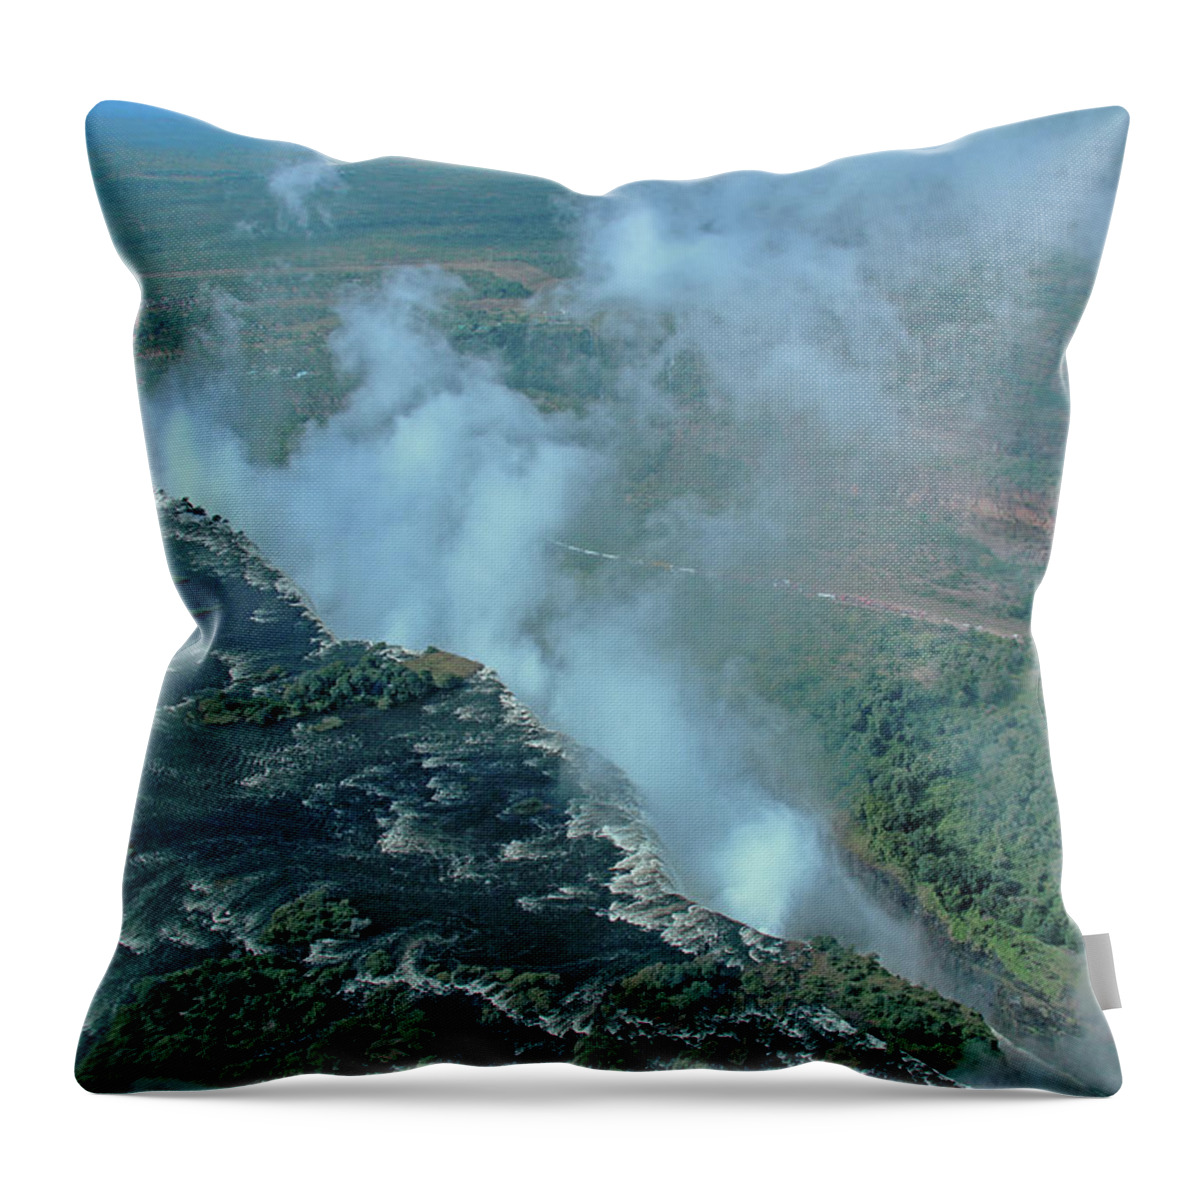 Victoria Falls Throw Pillow featuring the photograph Victoria Falls by Richard Krebs